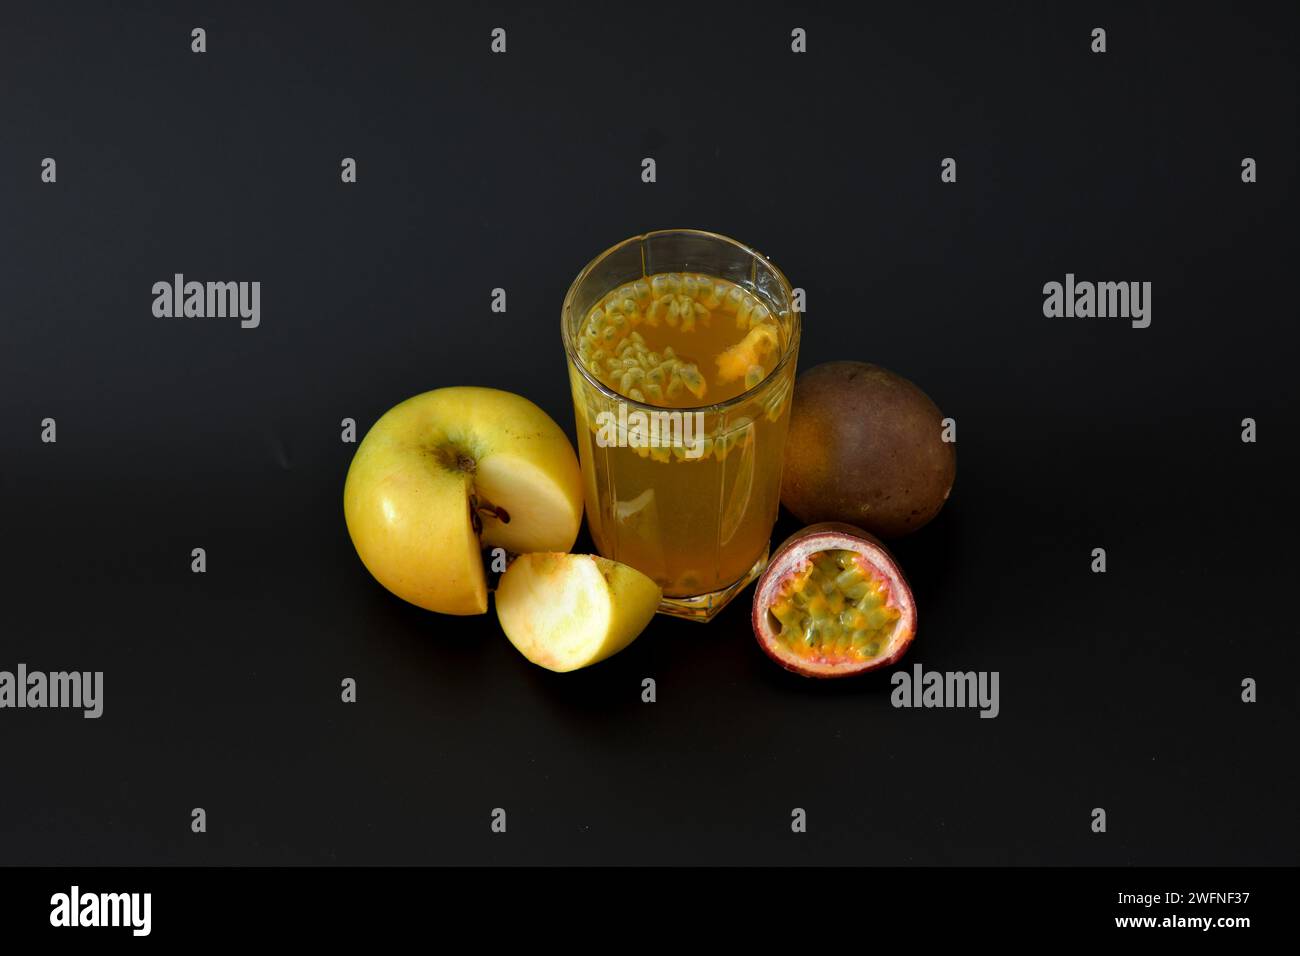 A glass of fruit juice with seeds on a black background, next to pieces of ripe passion fruit and a green apple, Top view, flat lay. Stock Photo